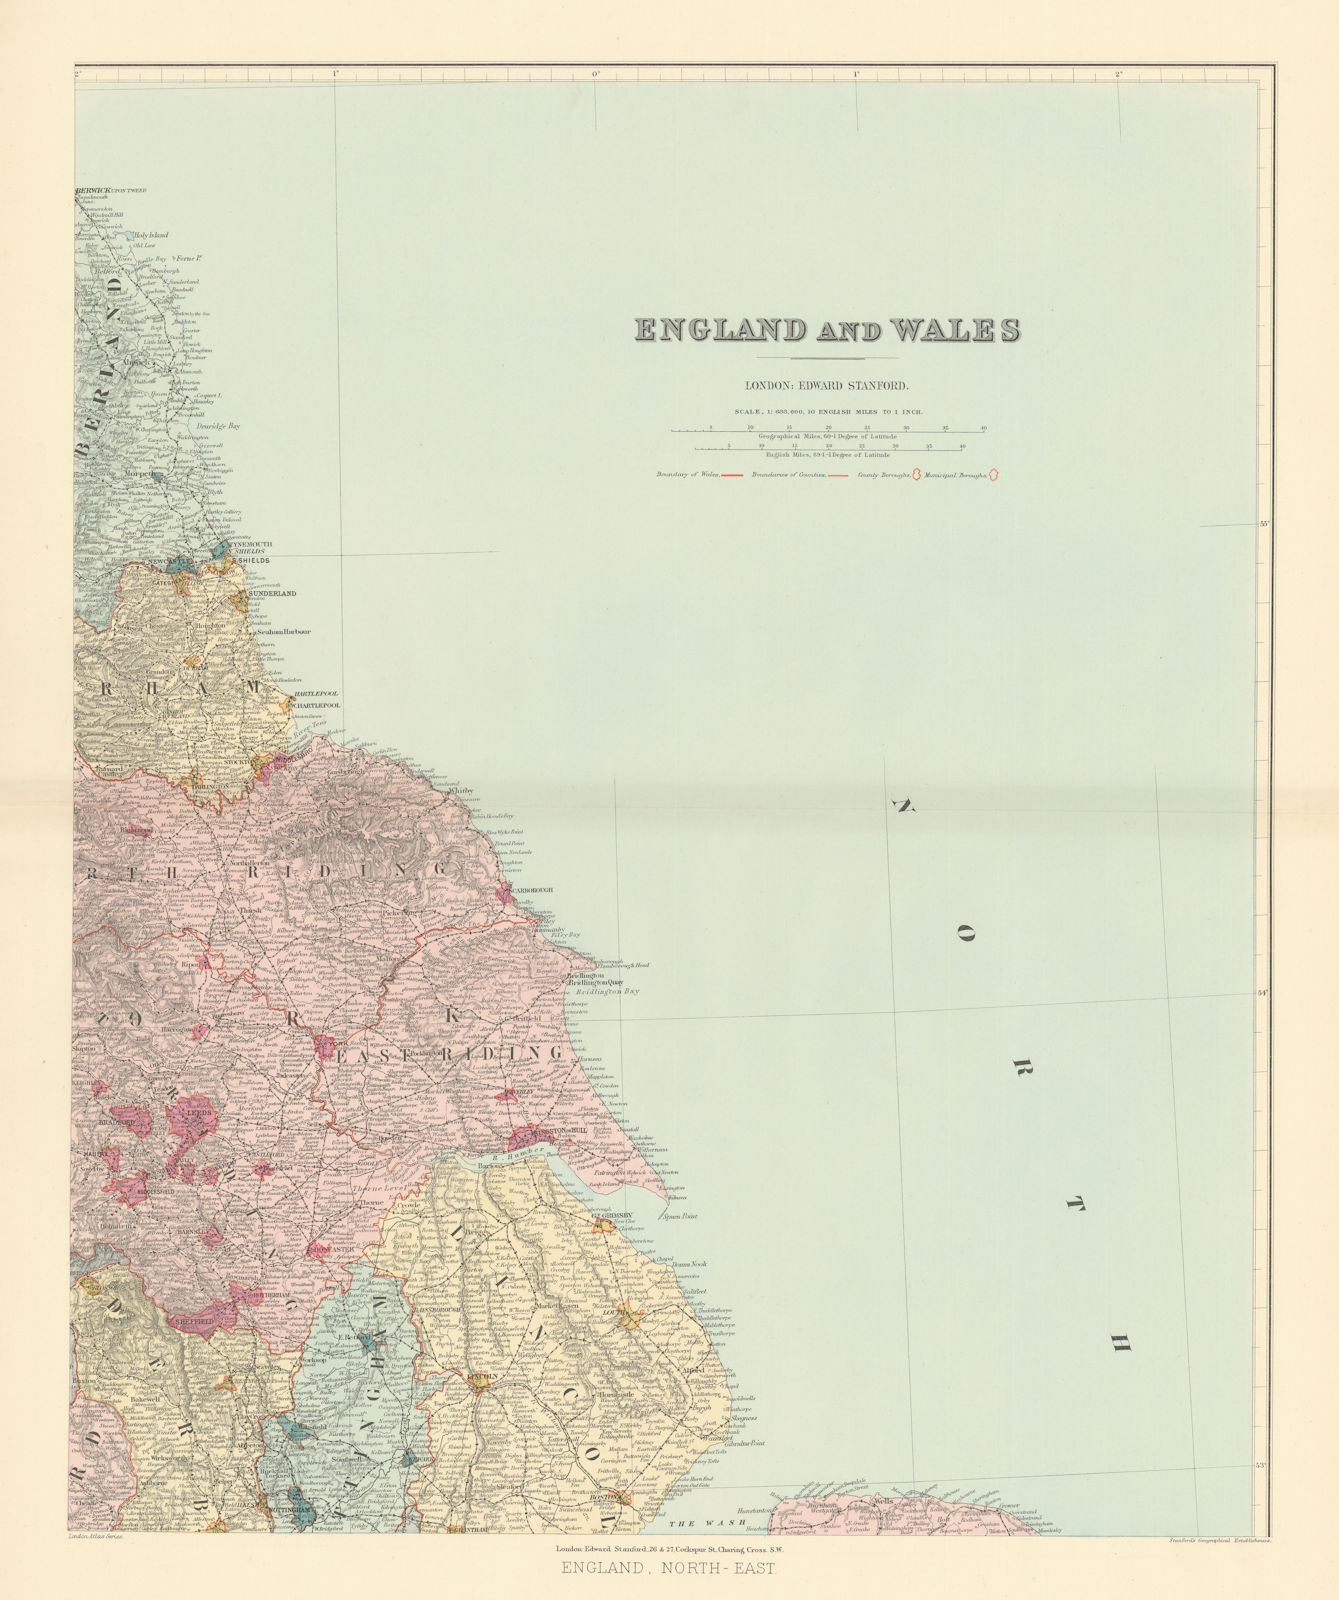 Associate Product North east England. Tyneside Yorkshire Lincolnshire. 62x51cm STANFORD 1896 map